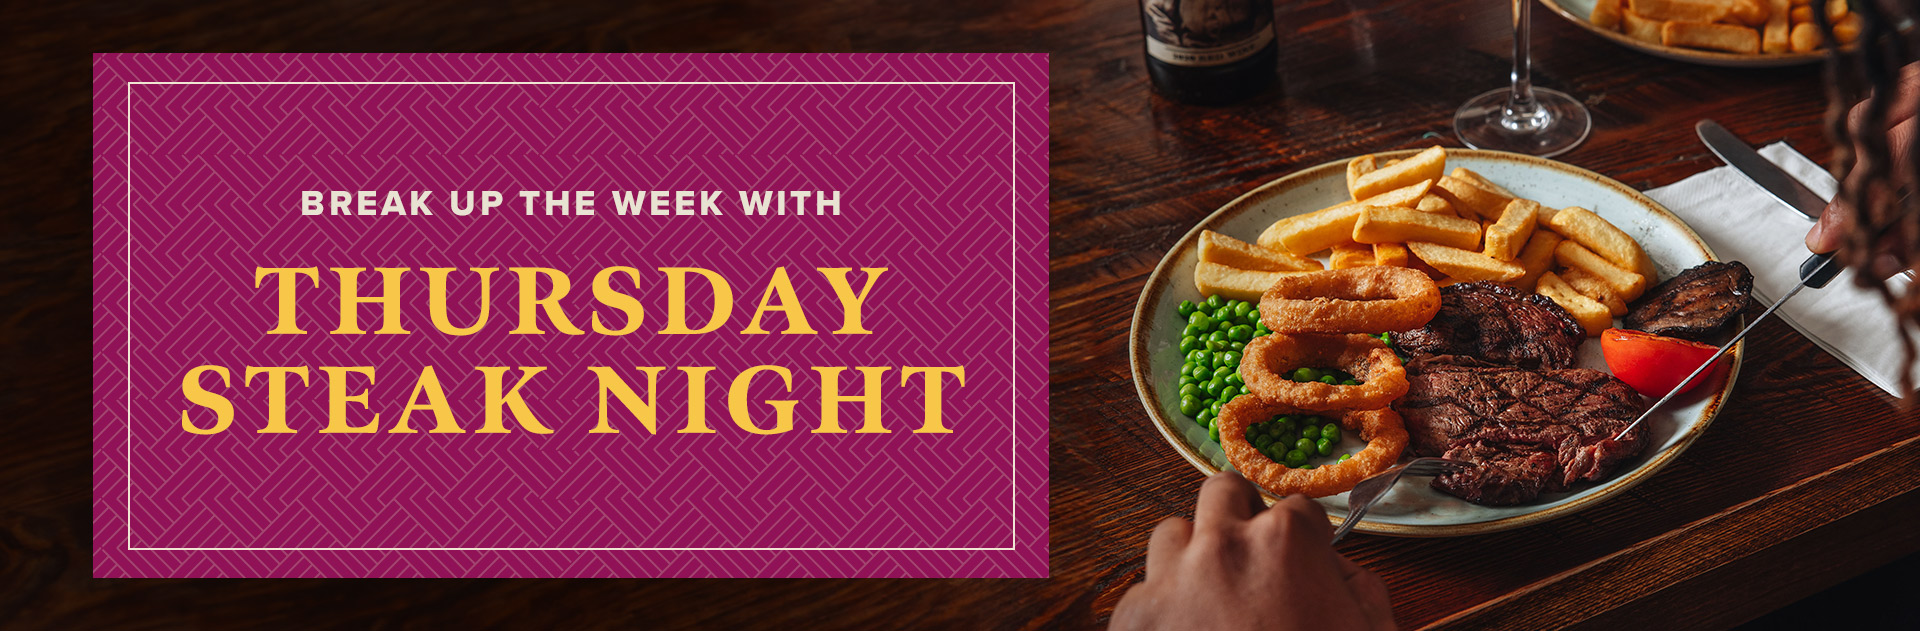 Thursday Steak Night at The Beaufort Arms